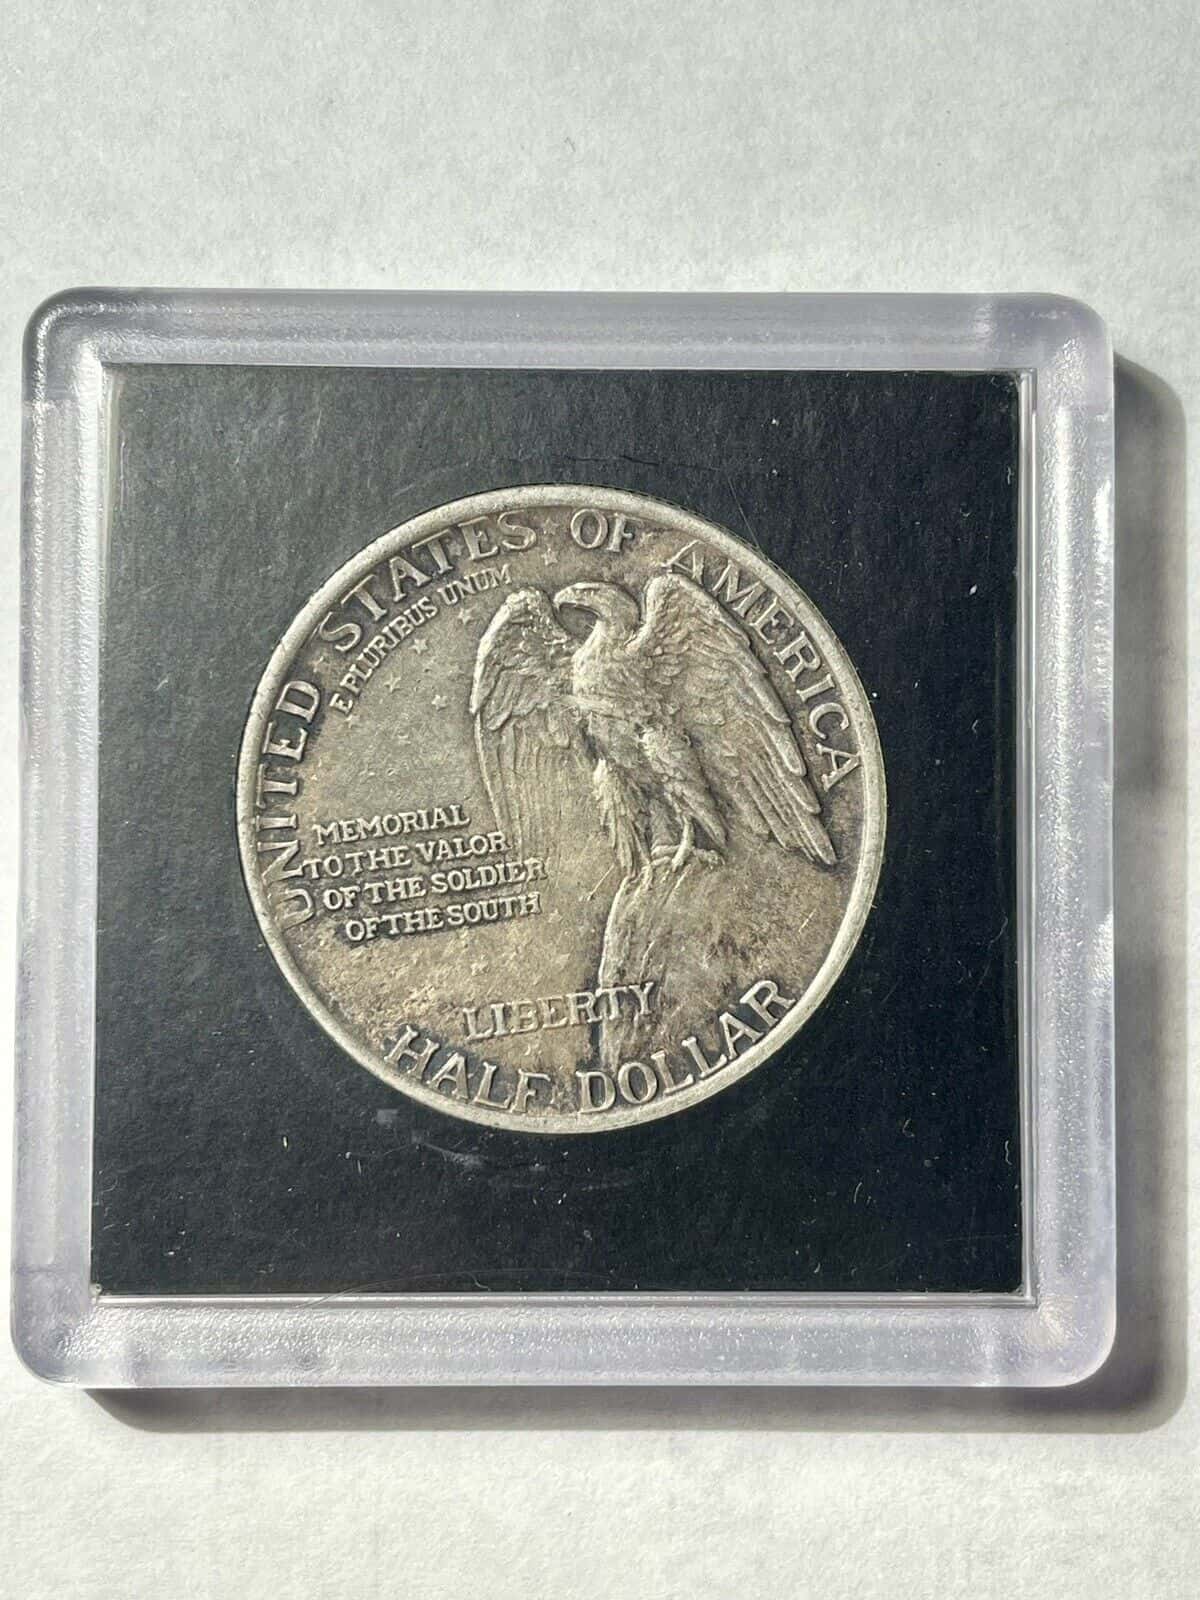 The Reverse of the 1925 Stone Mountain Half Dollar